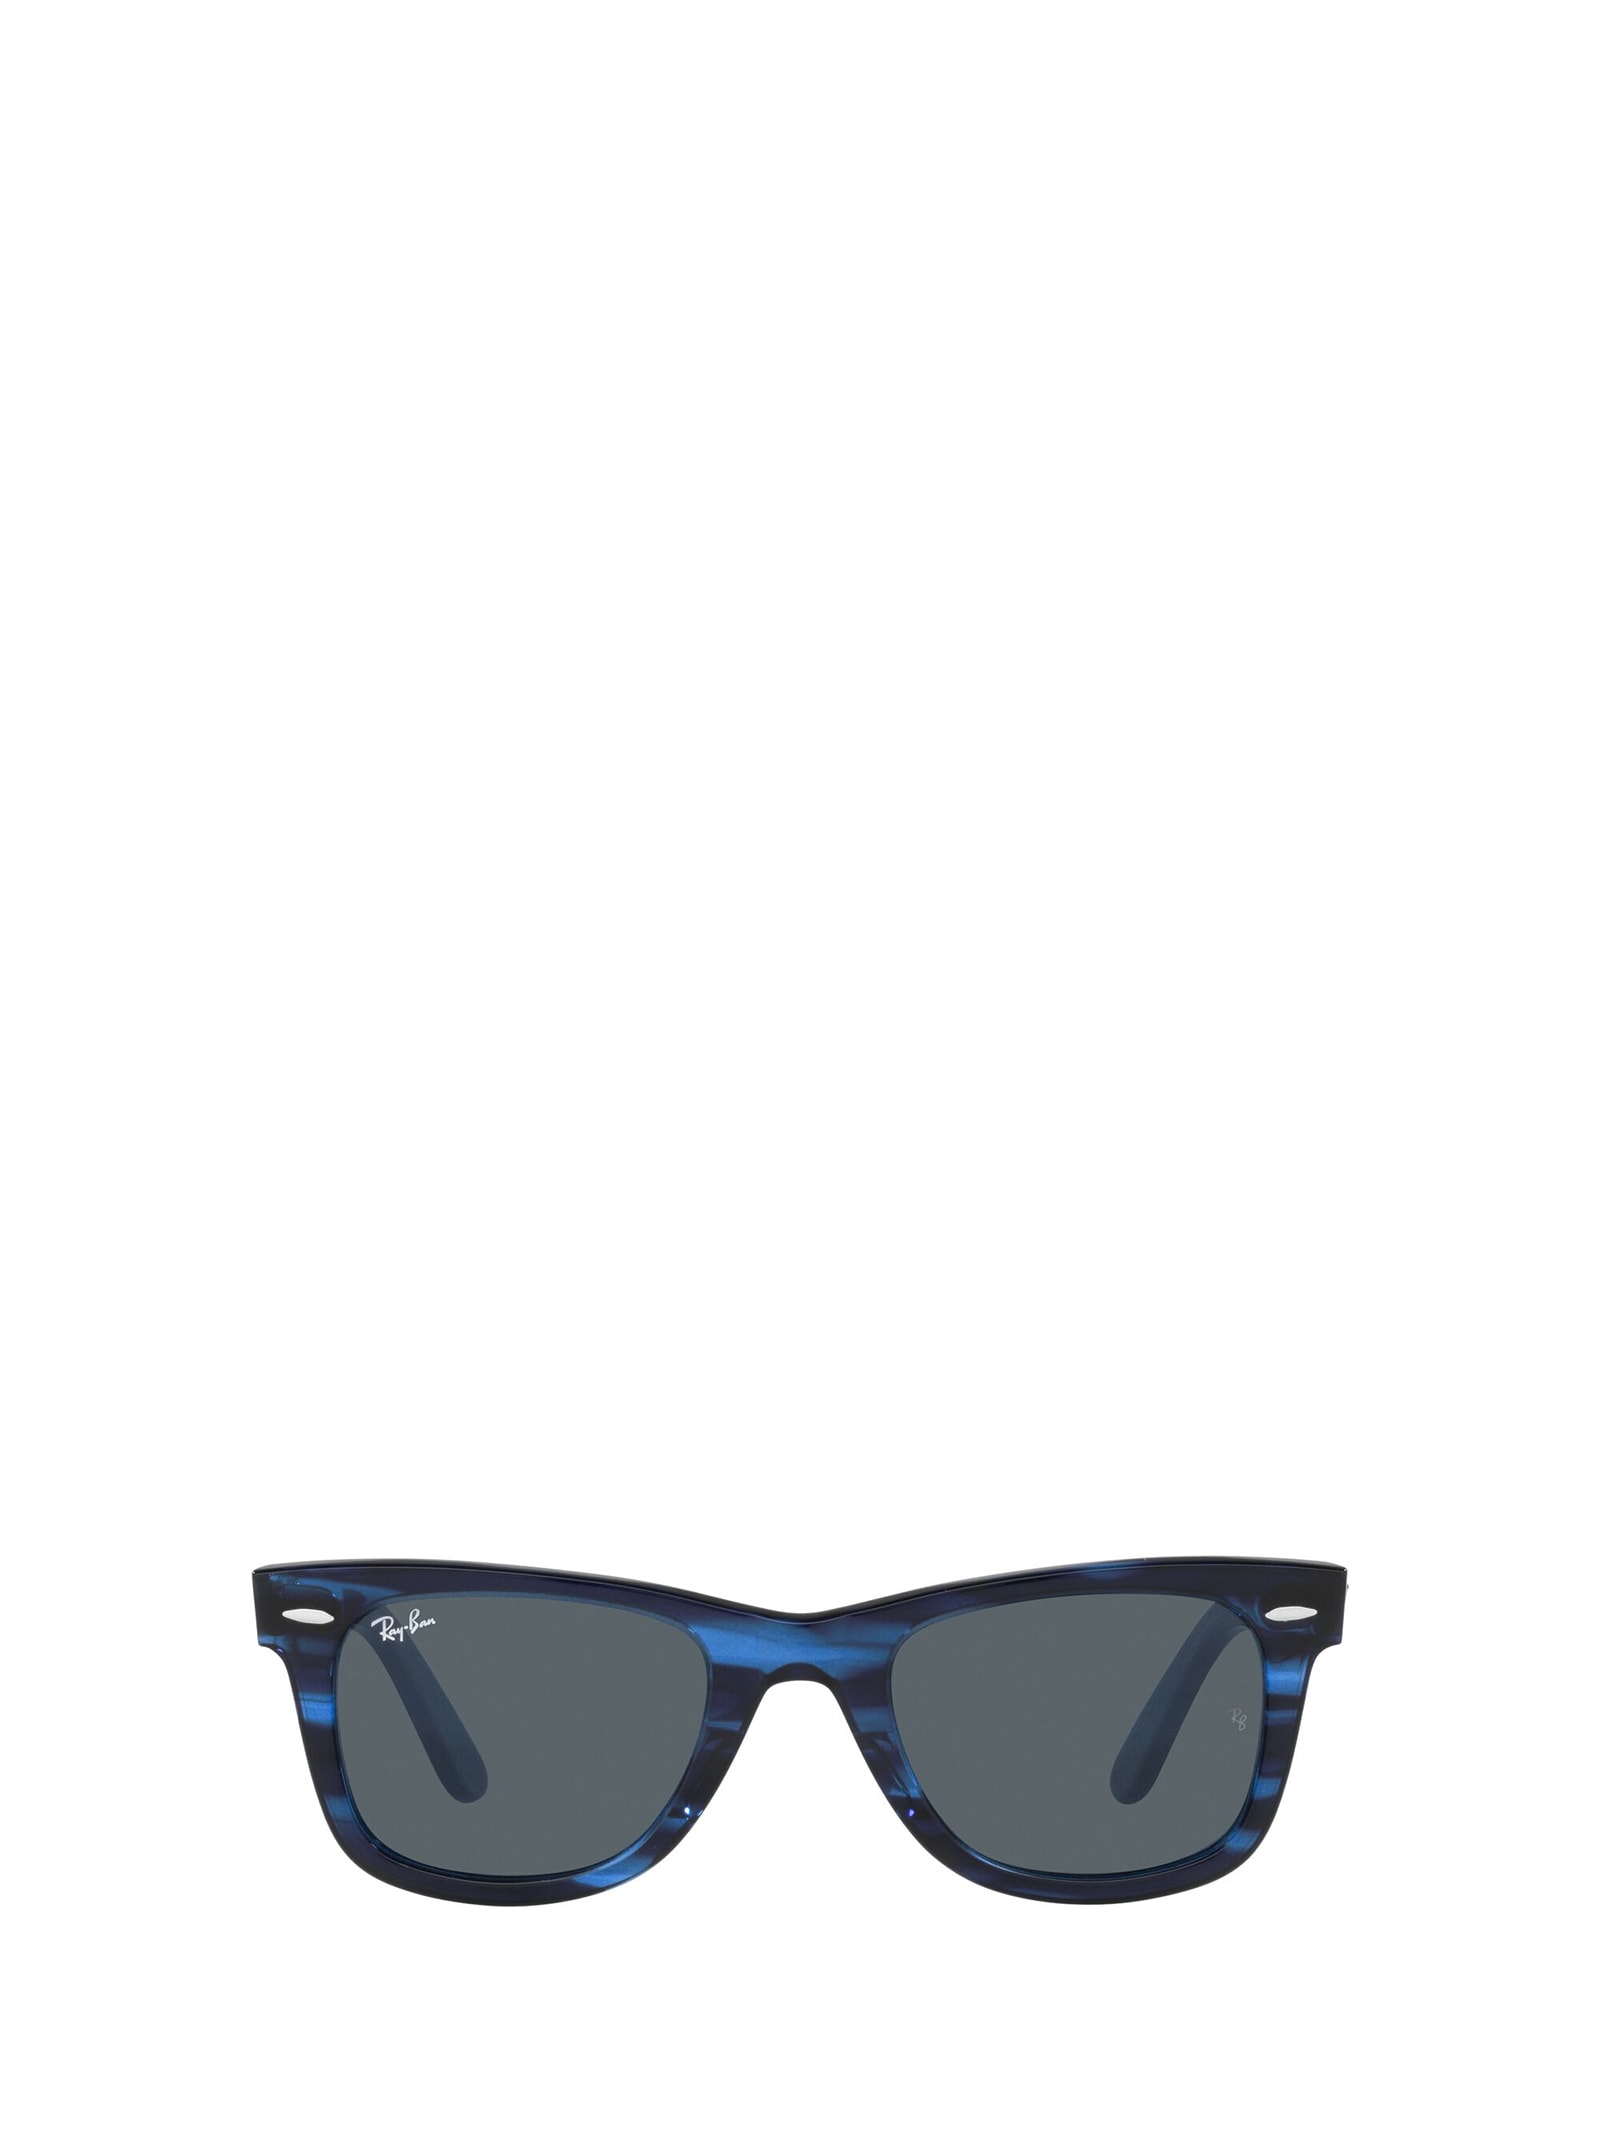 Ray-Ban Rb2140 Striped Blue Sunglasses